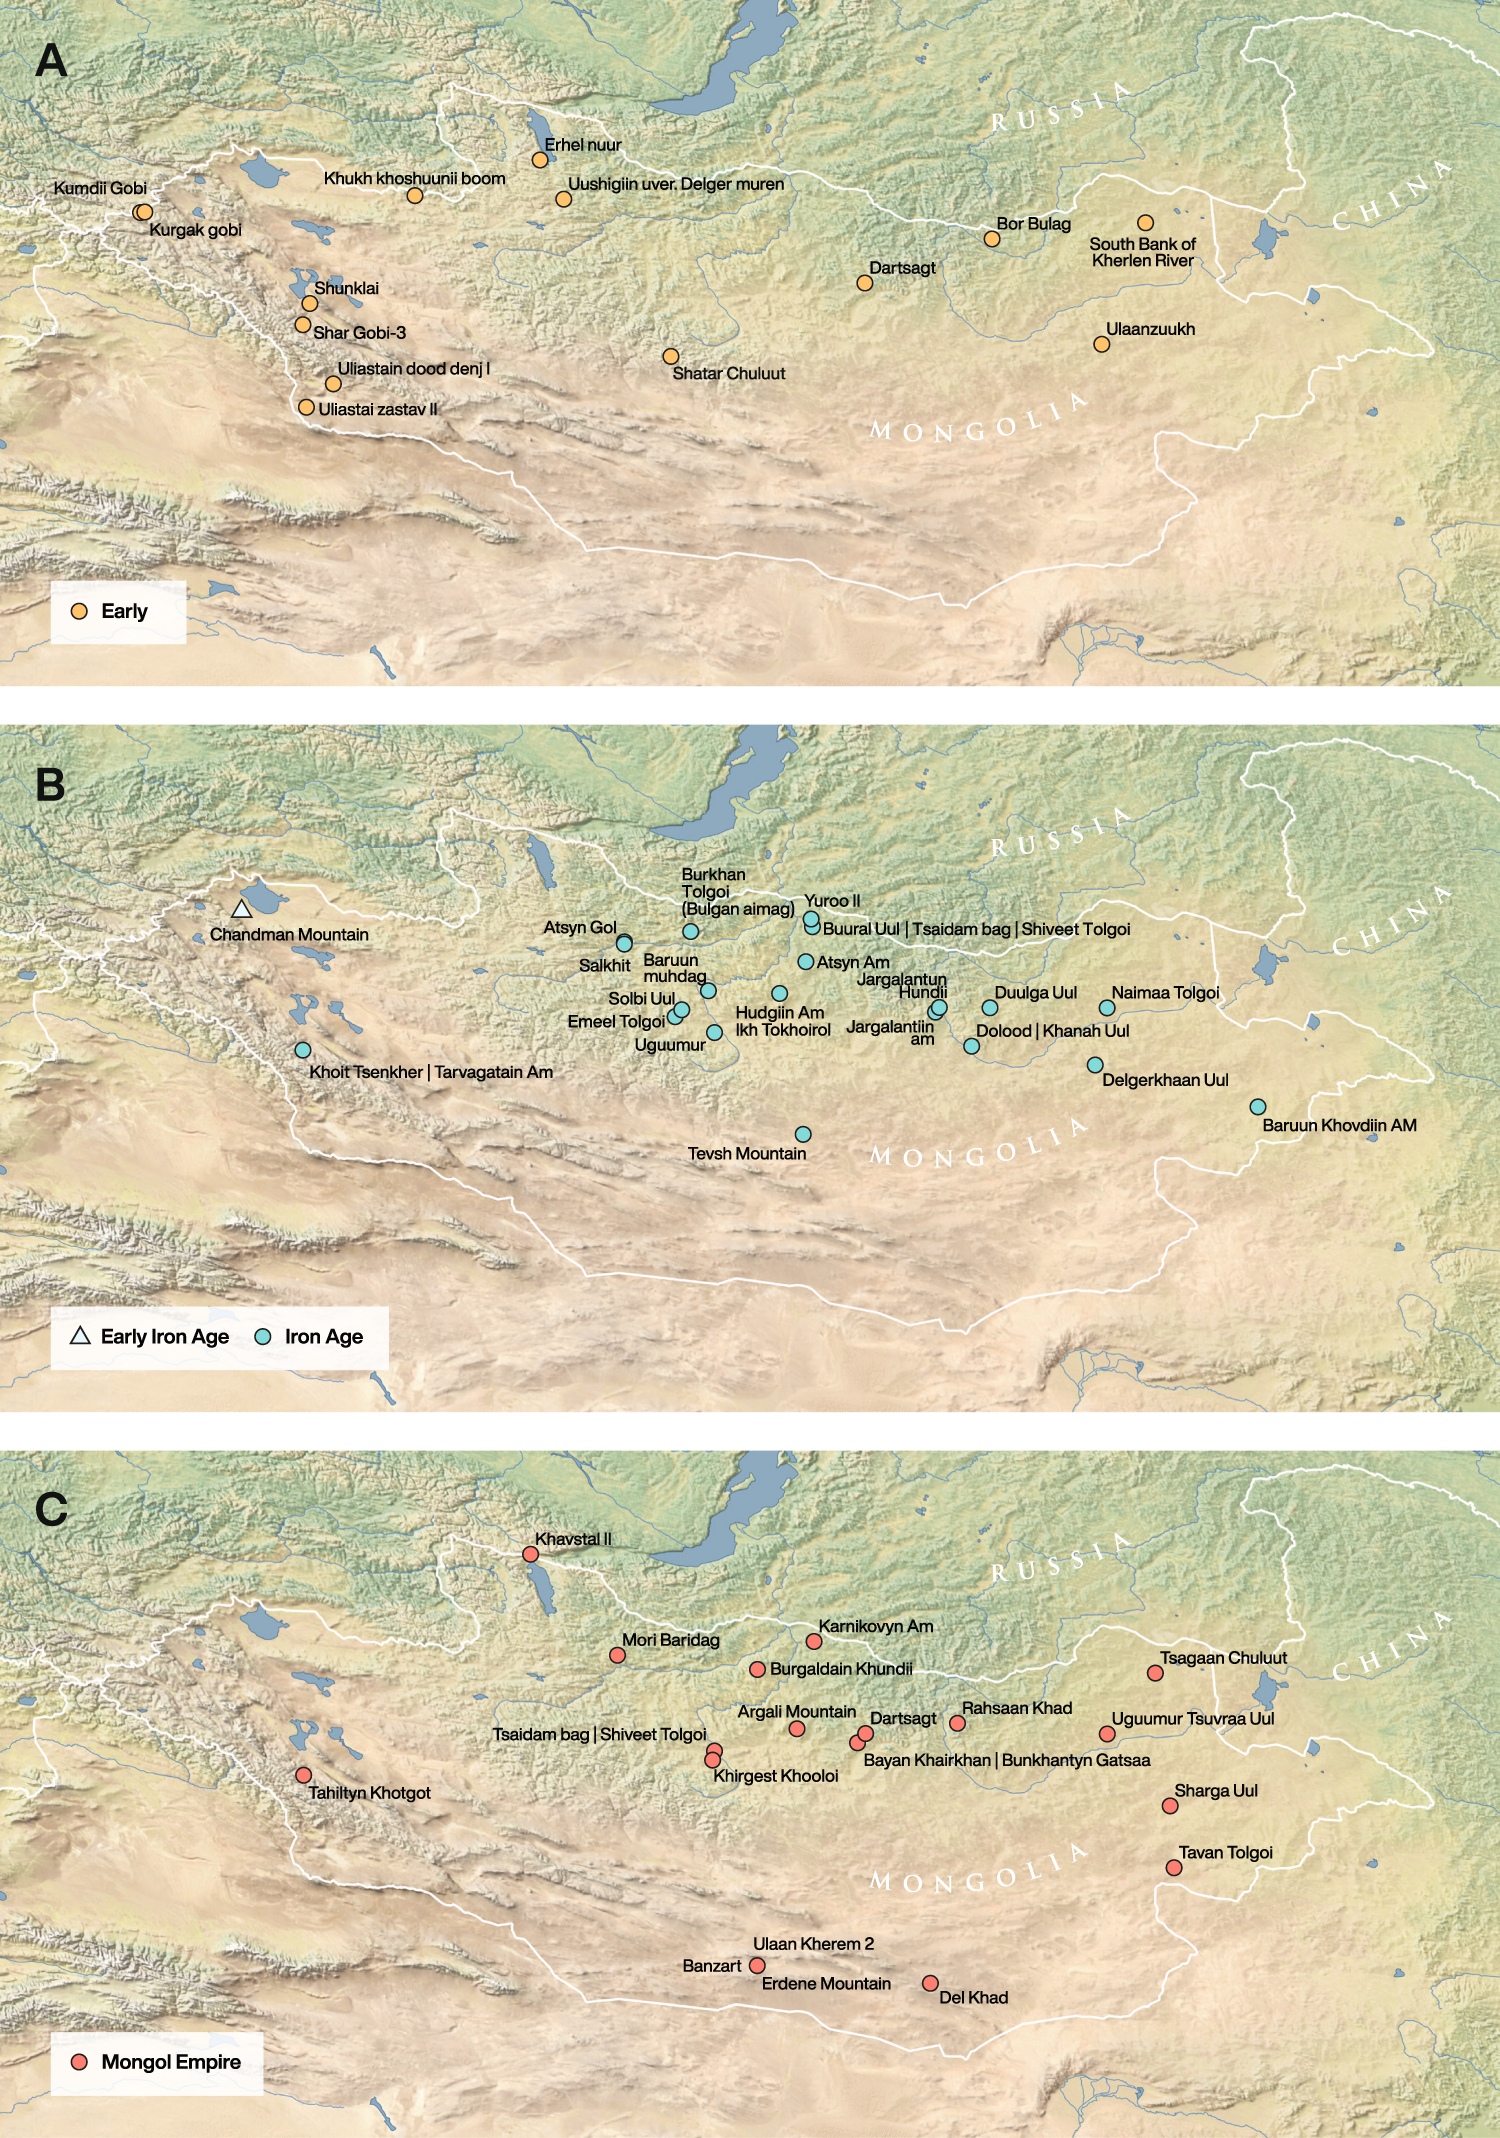 Economic Diversification Supported the Growth of Mongolia's Nomadic Empires  | Scientific Reports